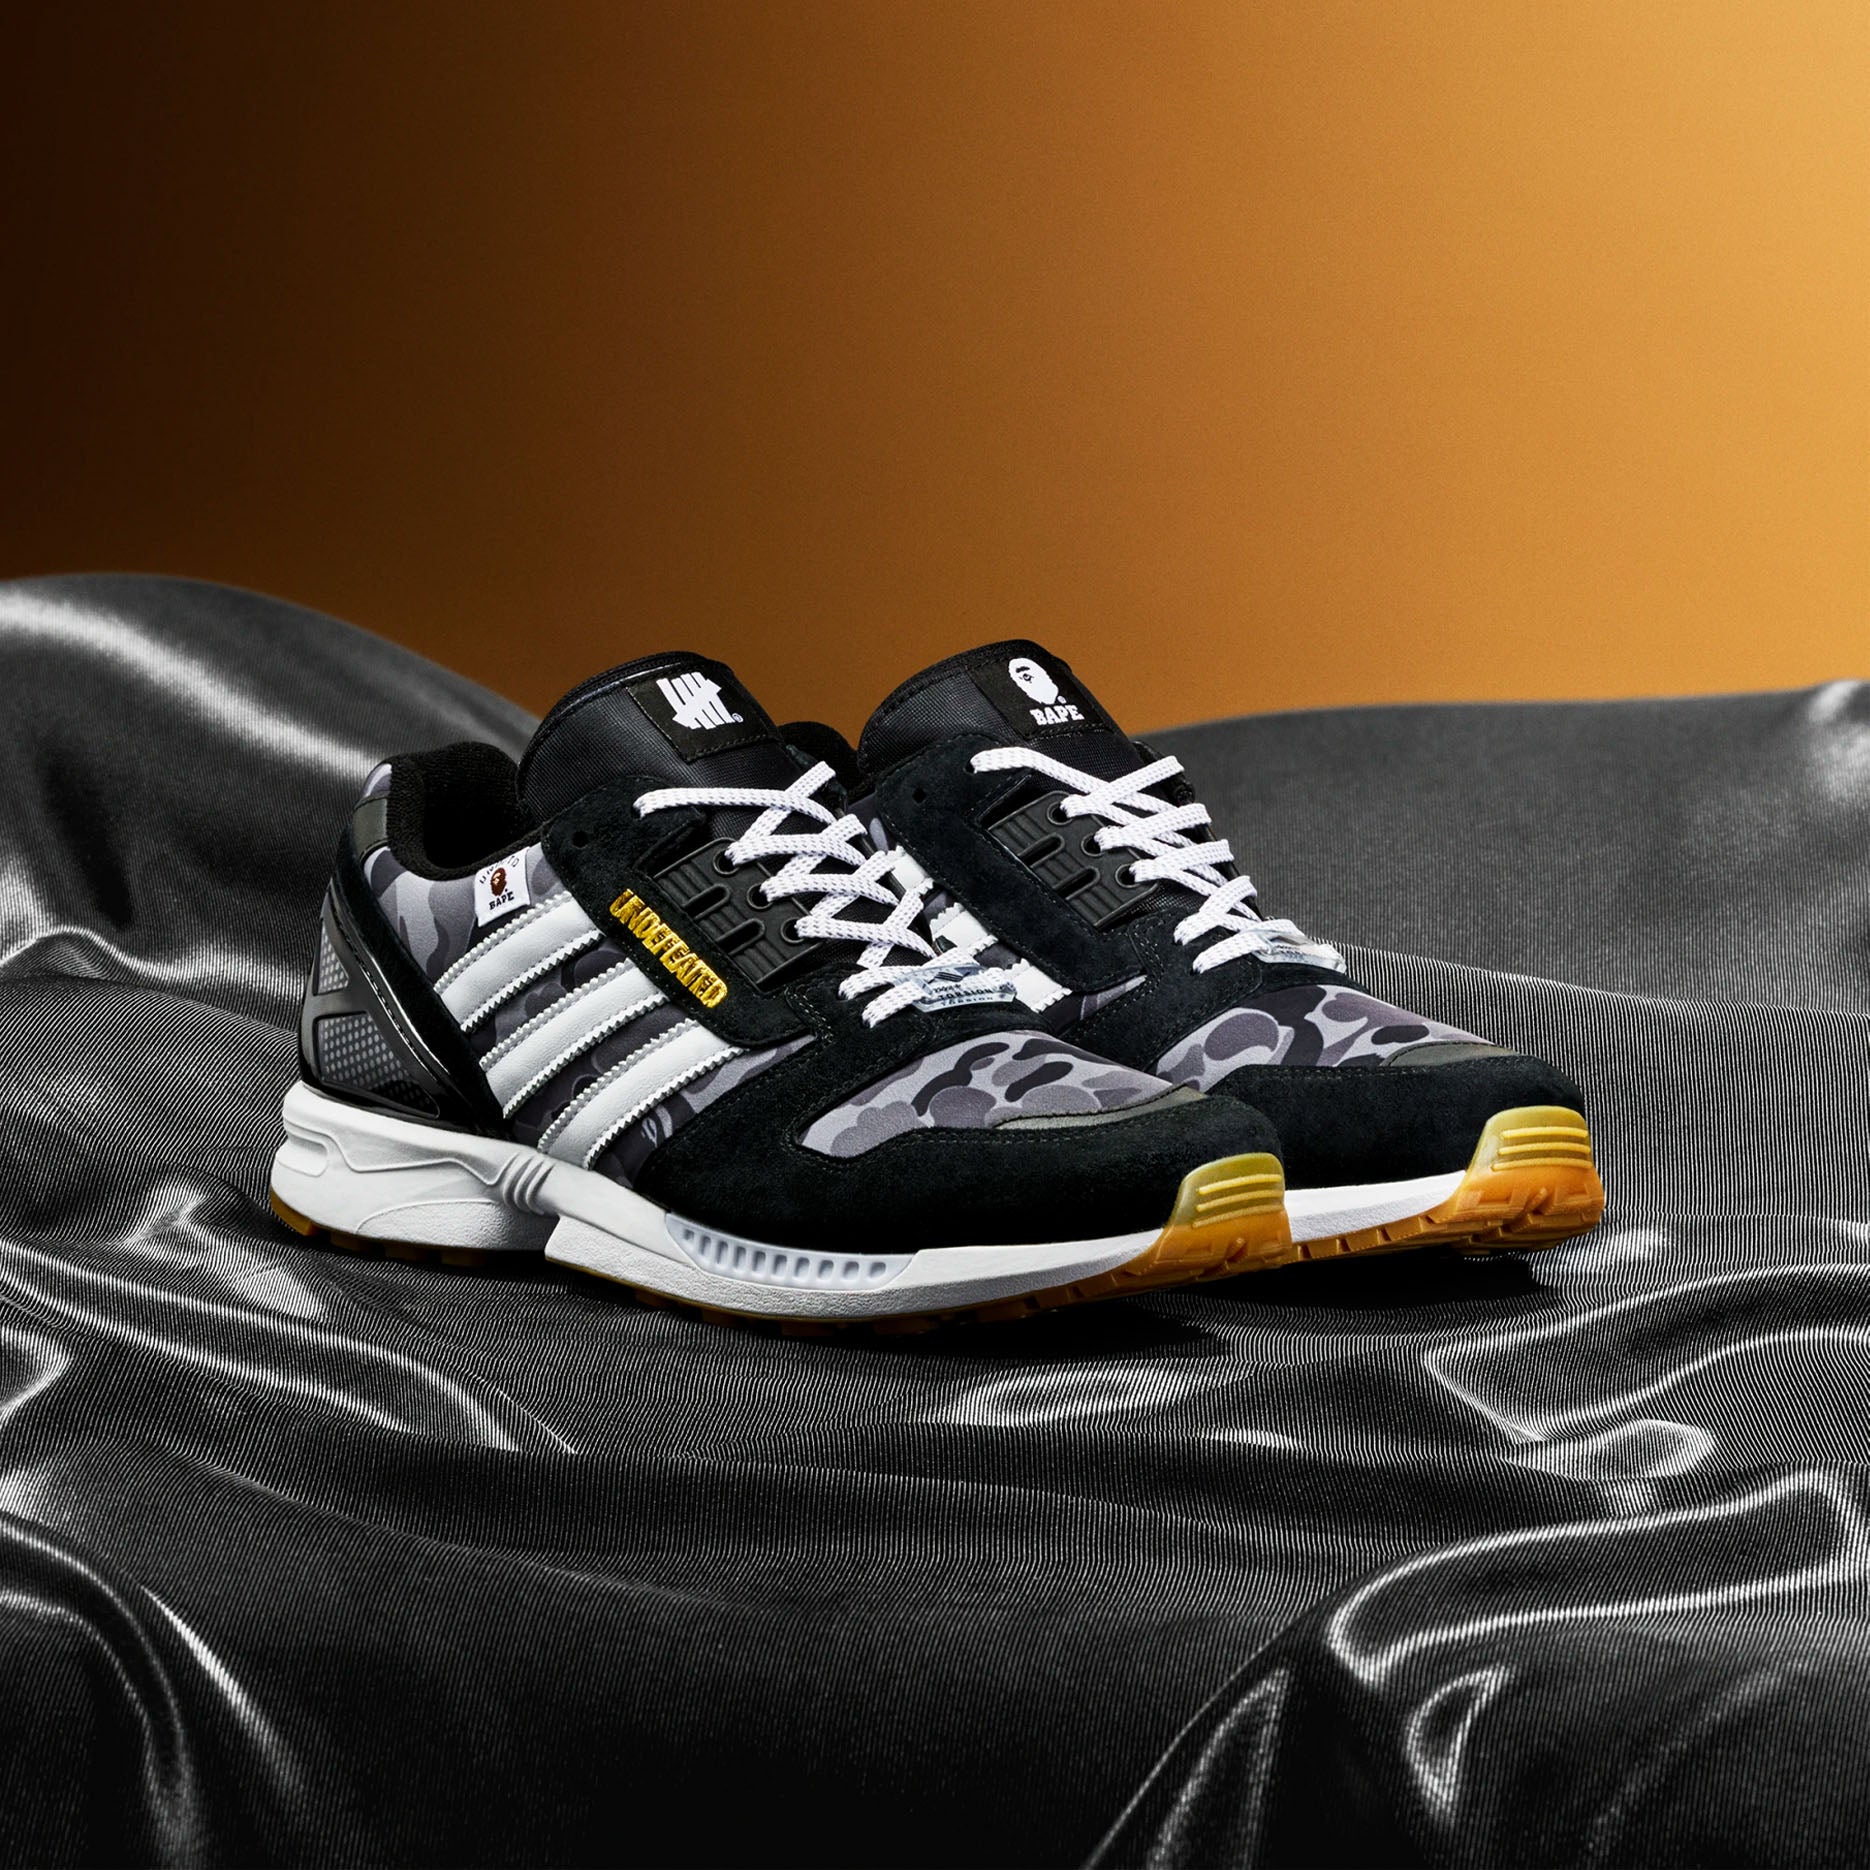 Adidas ZX 8000 x Undefeated Black – Sneakers